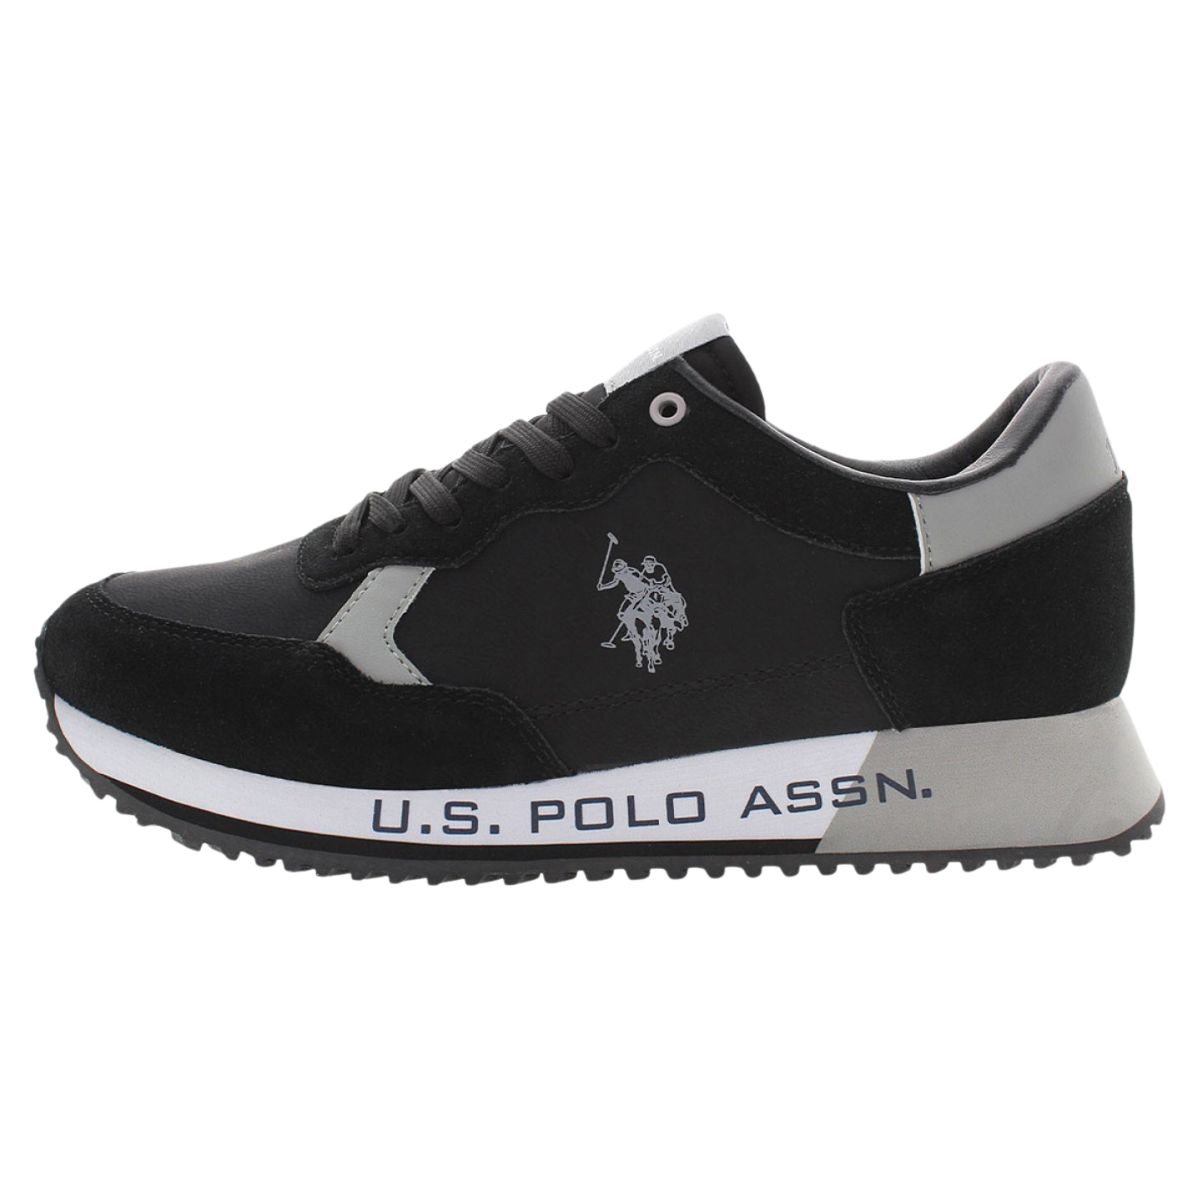 U.S.POLO ASSN, Ανδρικά Sneakers, Suede Sneakers, Sneakers με Κορδόνια, Sneakers Μαύρα, CLEEF005-BLK